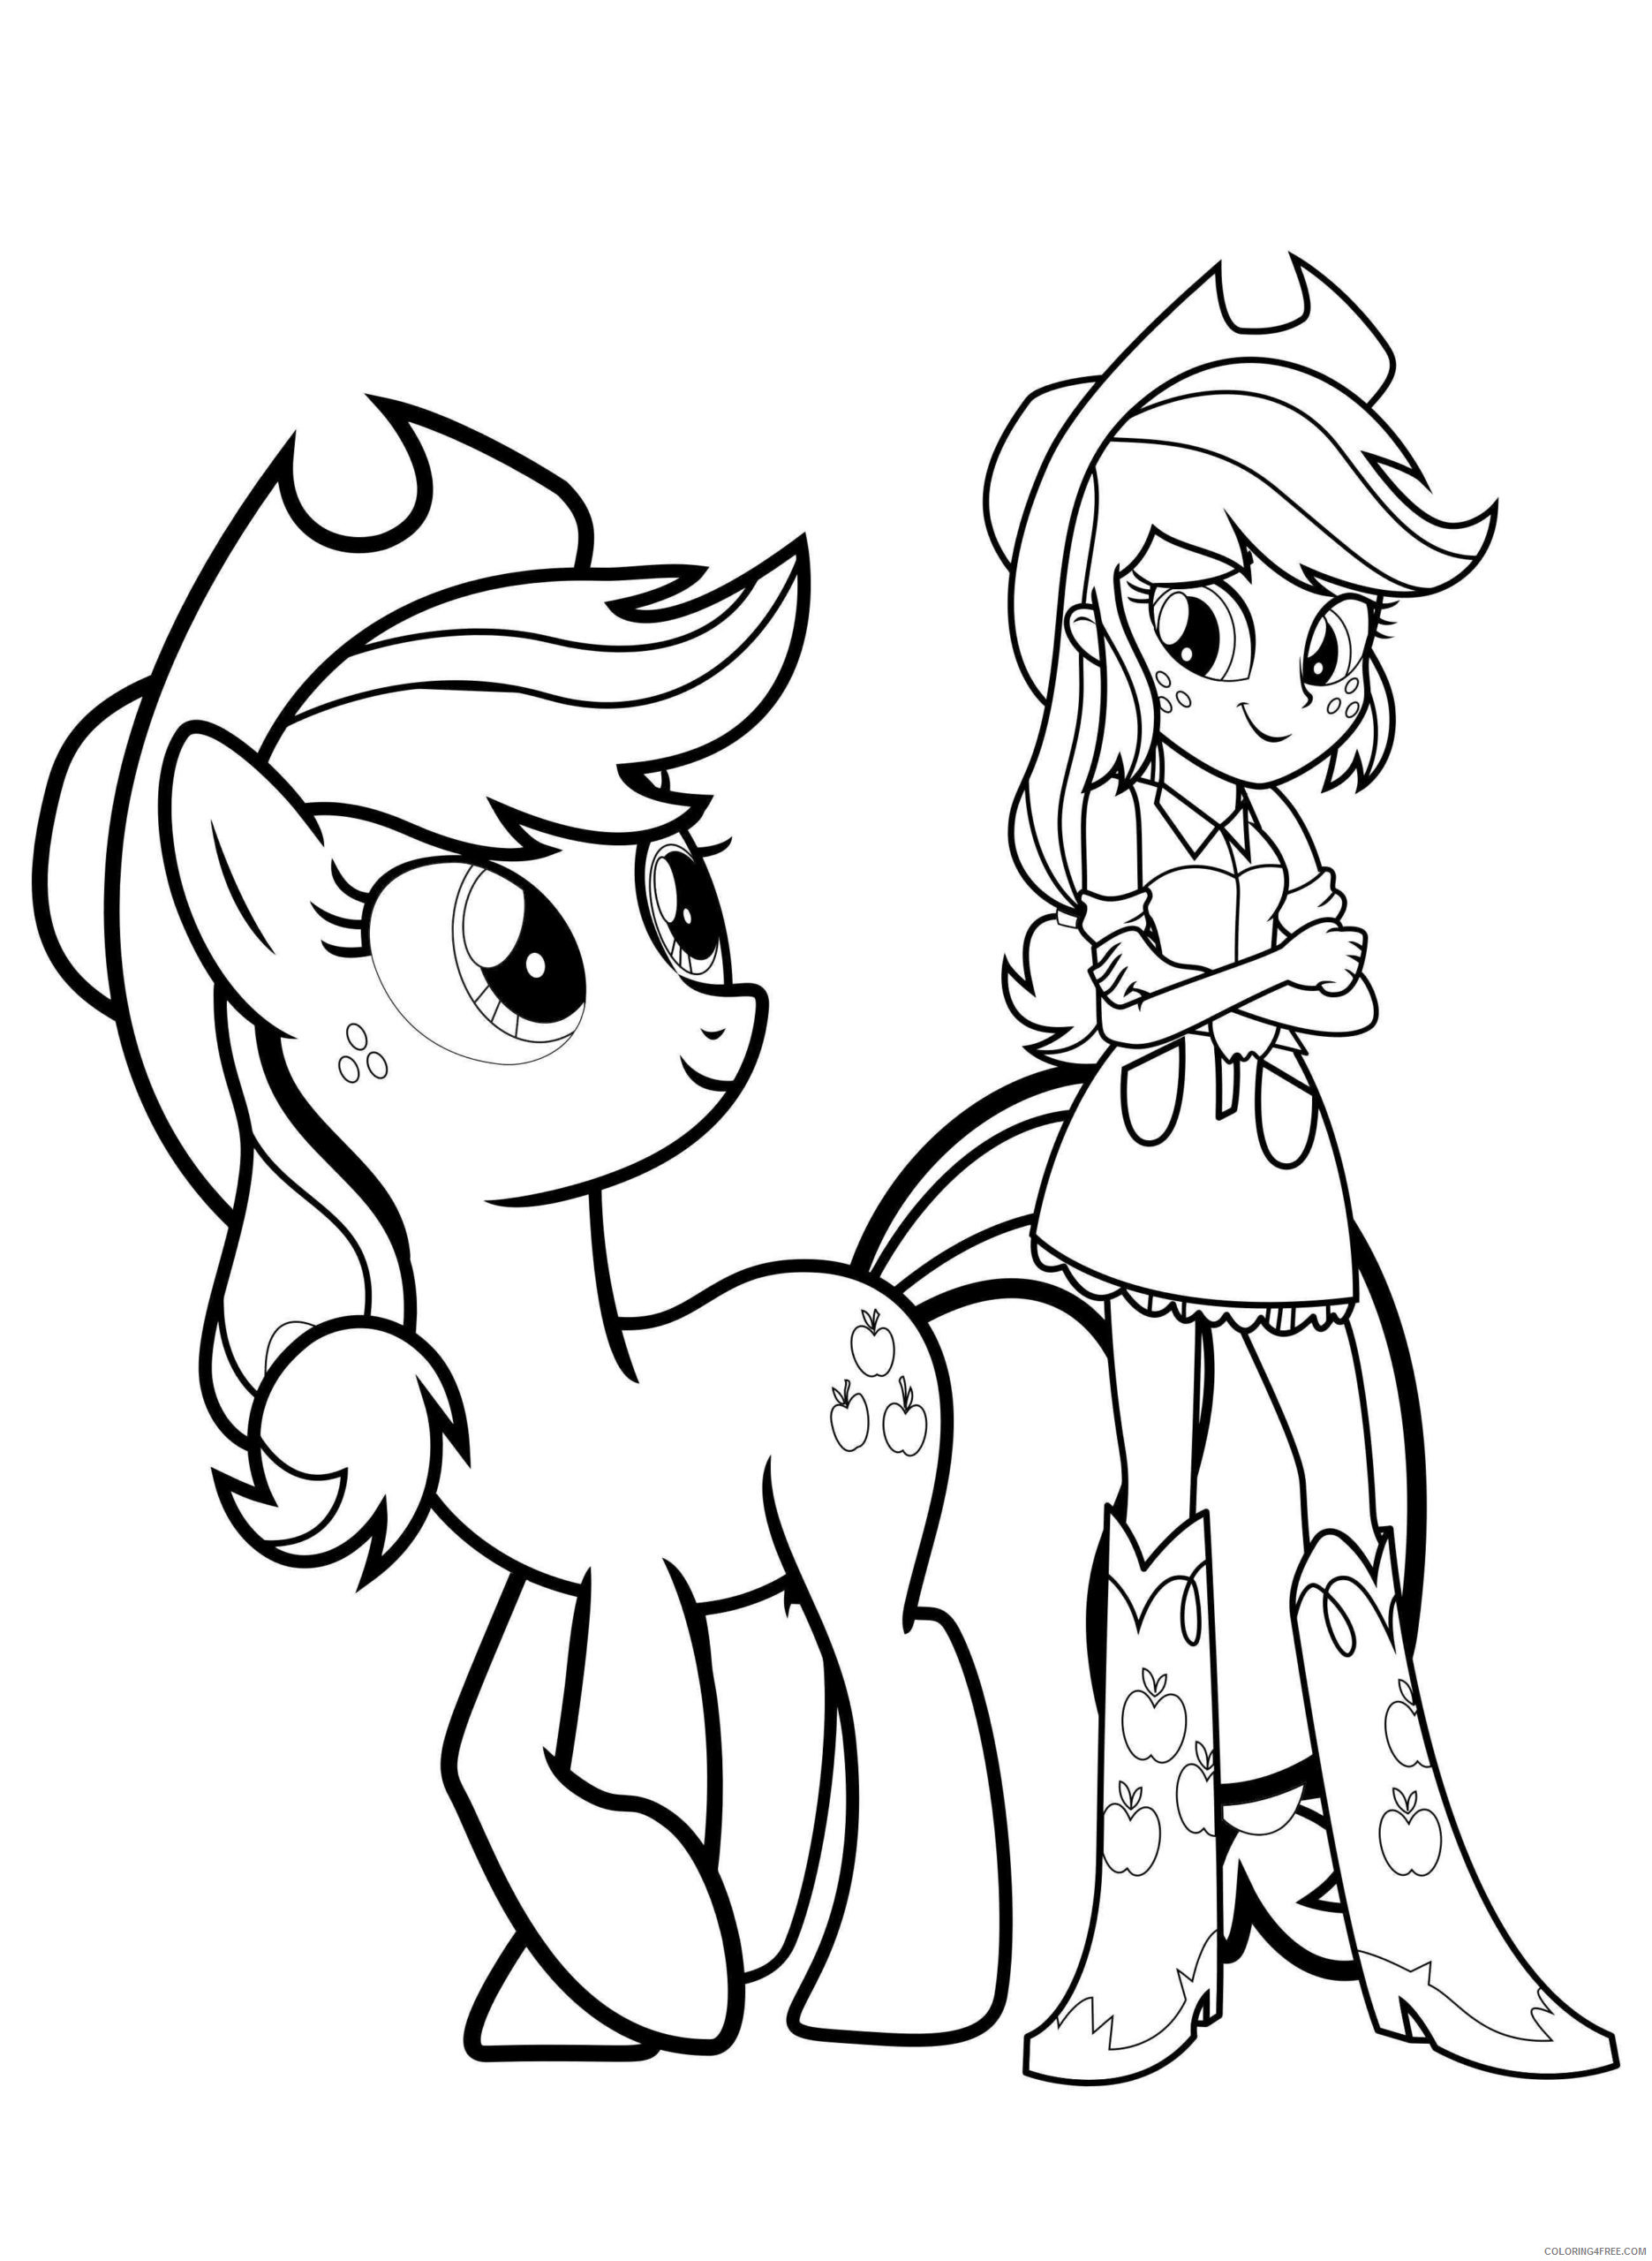 My Little Pony Coloring Pages Cartoons Applejack MLP and Equestria Girl Printable 2020 4424 Coloring4free